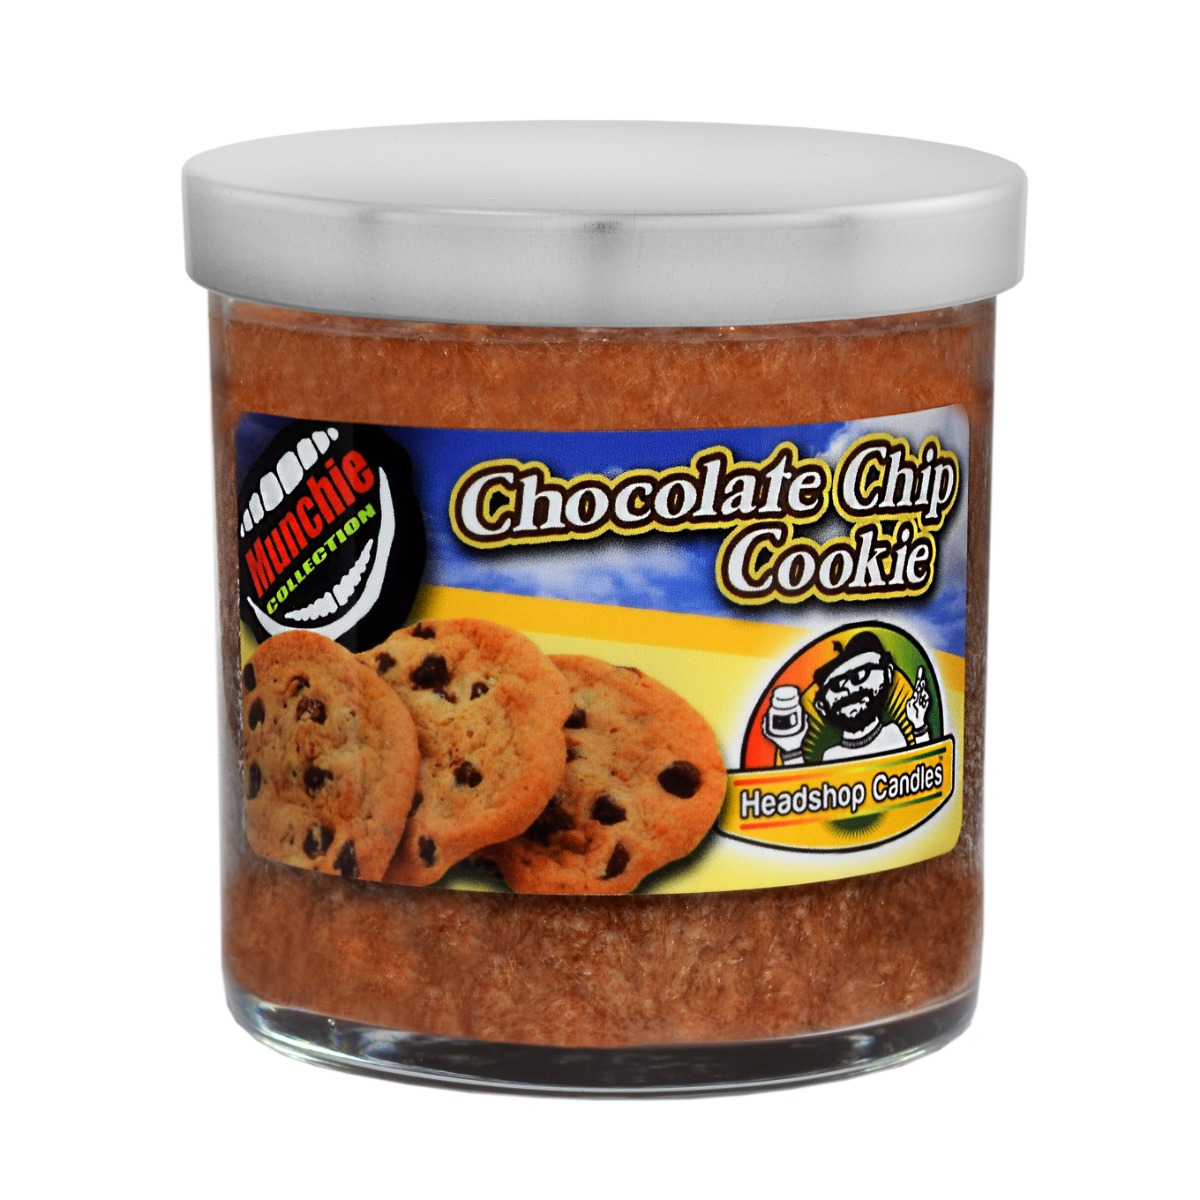 Headshop Candle Choc Chip Cookie